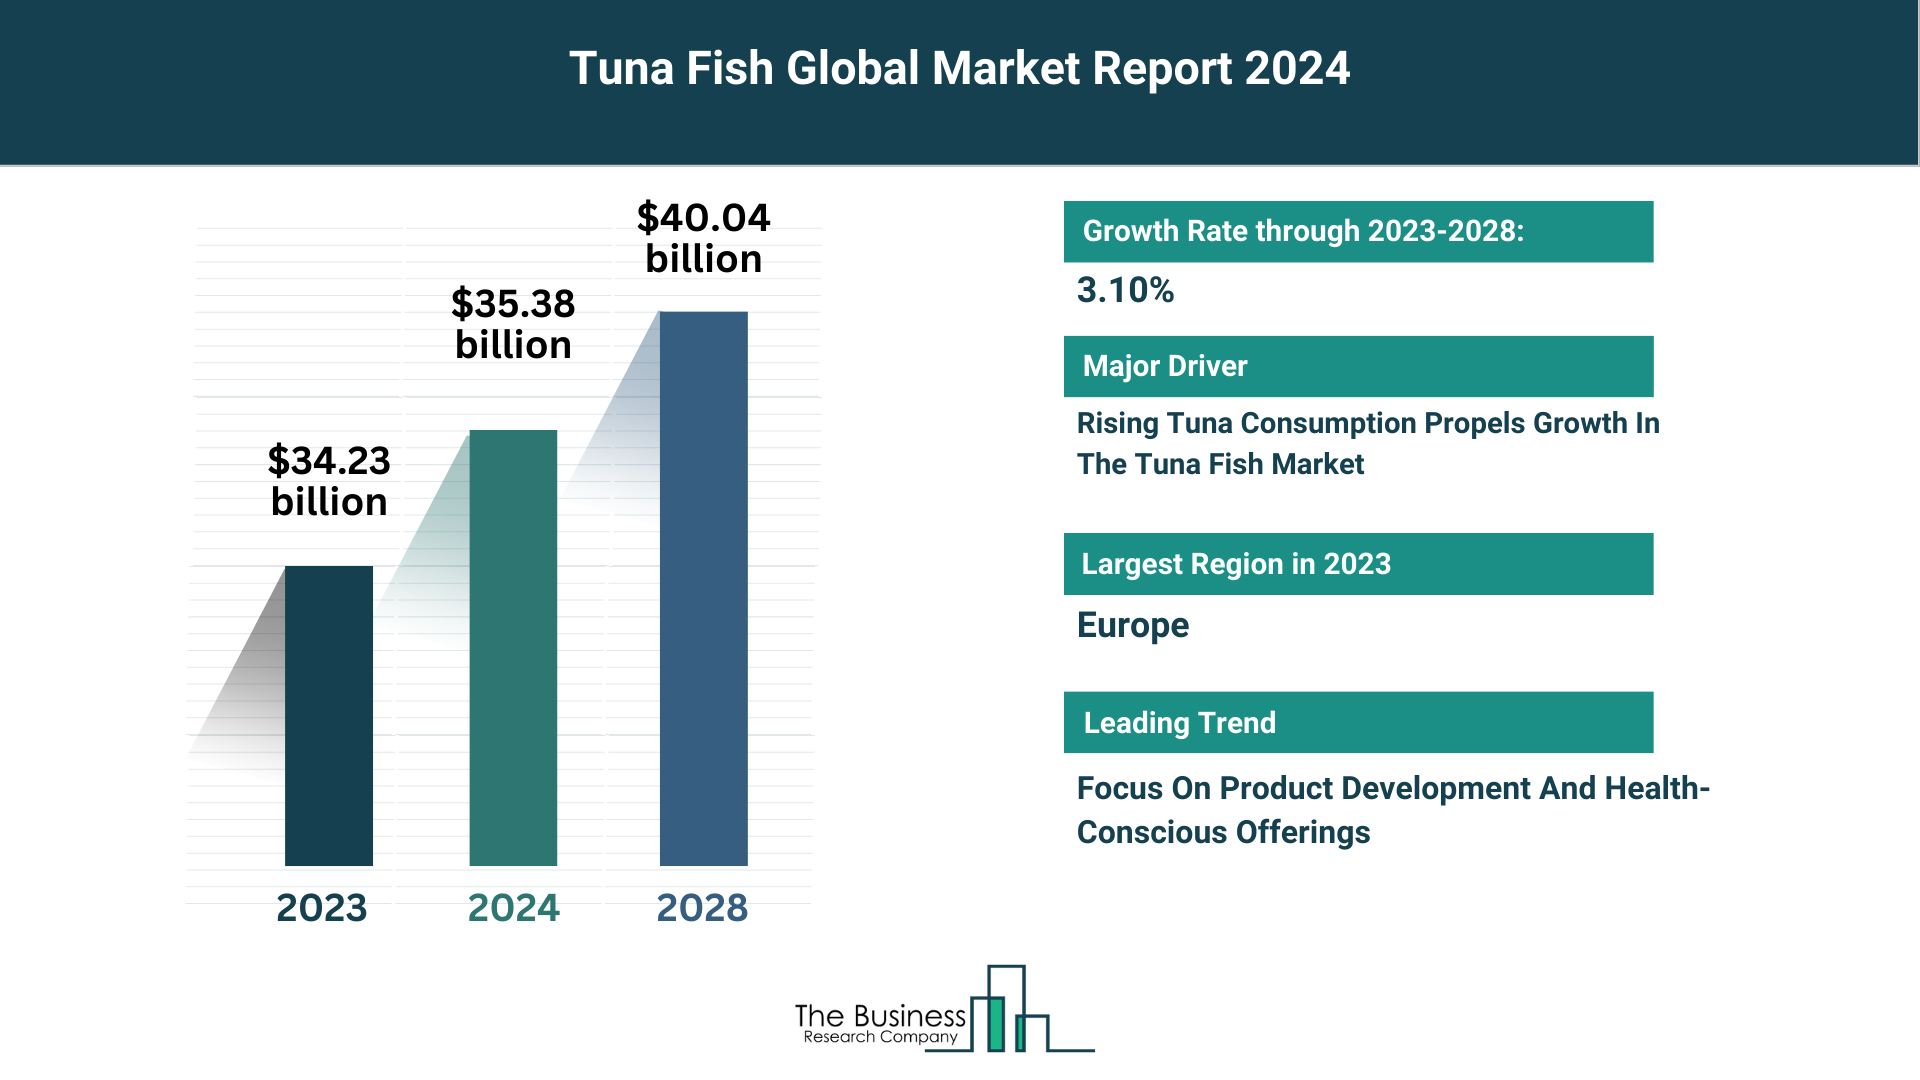 What Are The 5 Top Insights From The Tuna Fish Market Forecast 2024